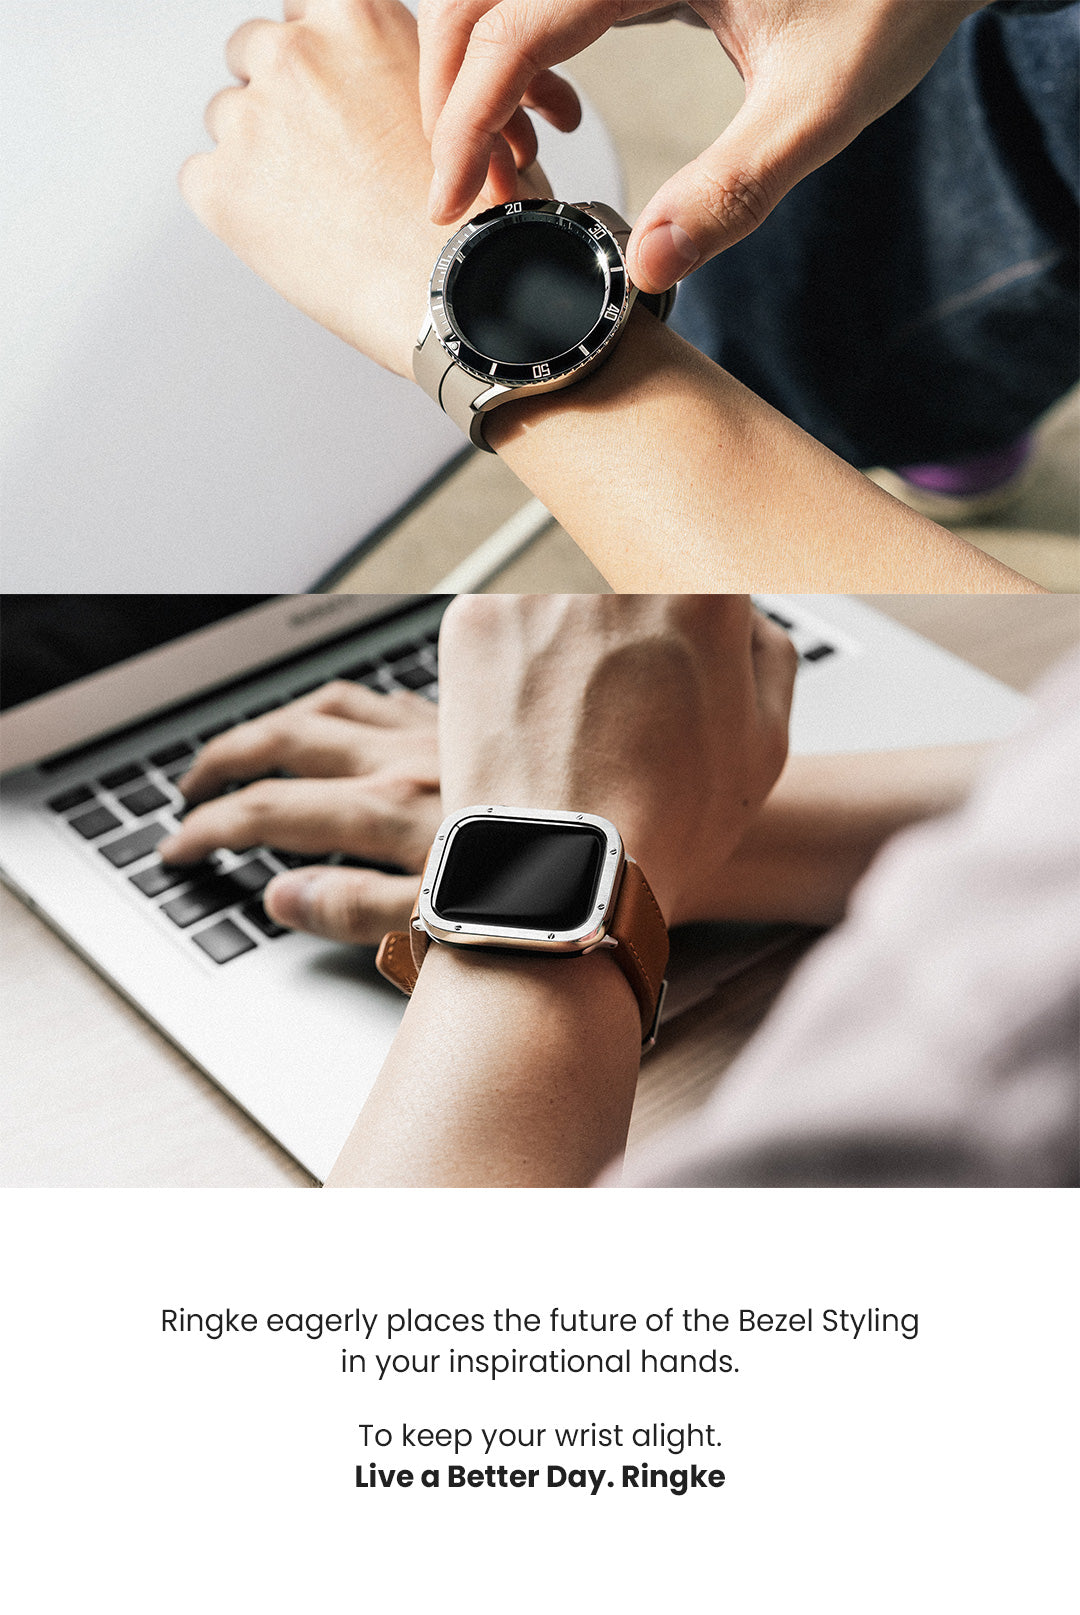 Ringke eagerly places the future of the Bezel Styling in your inspirational hands. To keep your wrist alight. Live a Better Day. Ringke